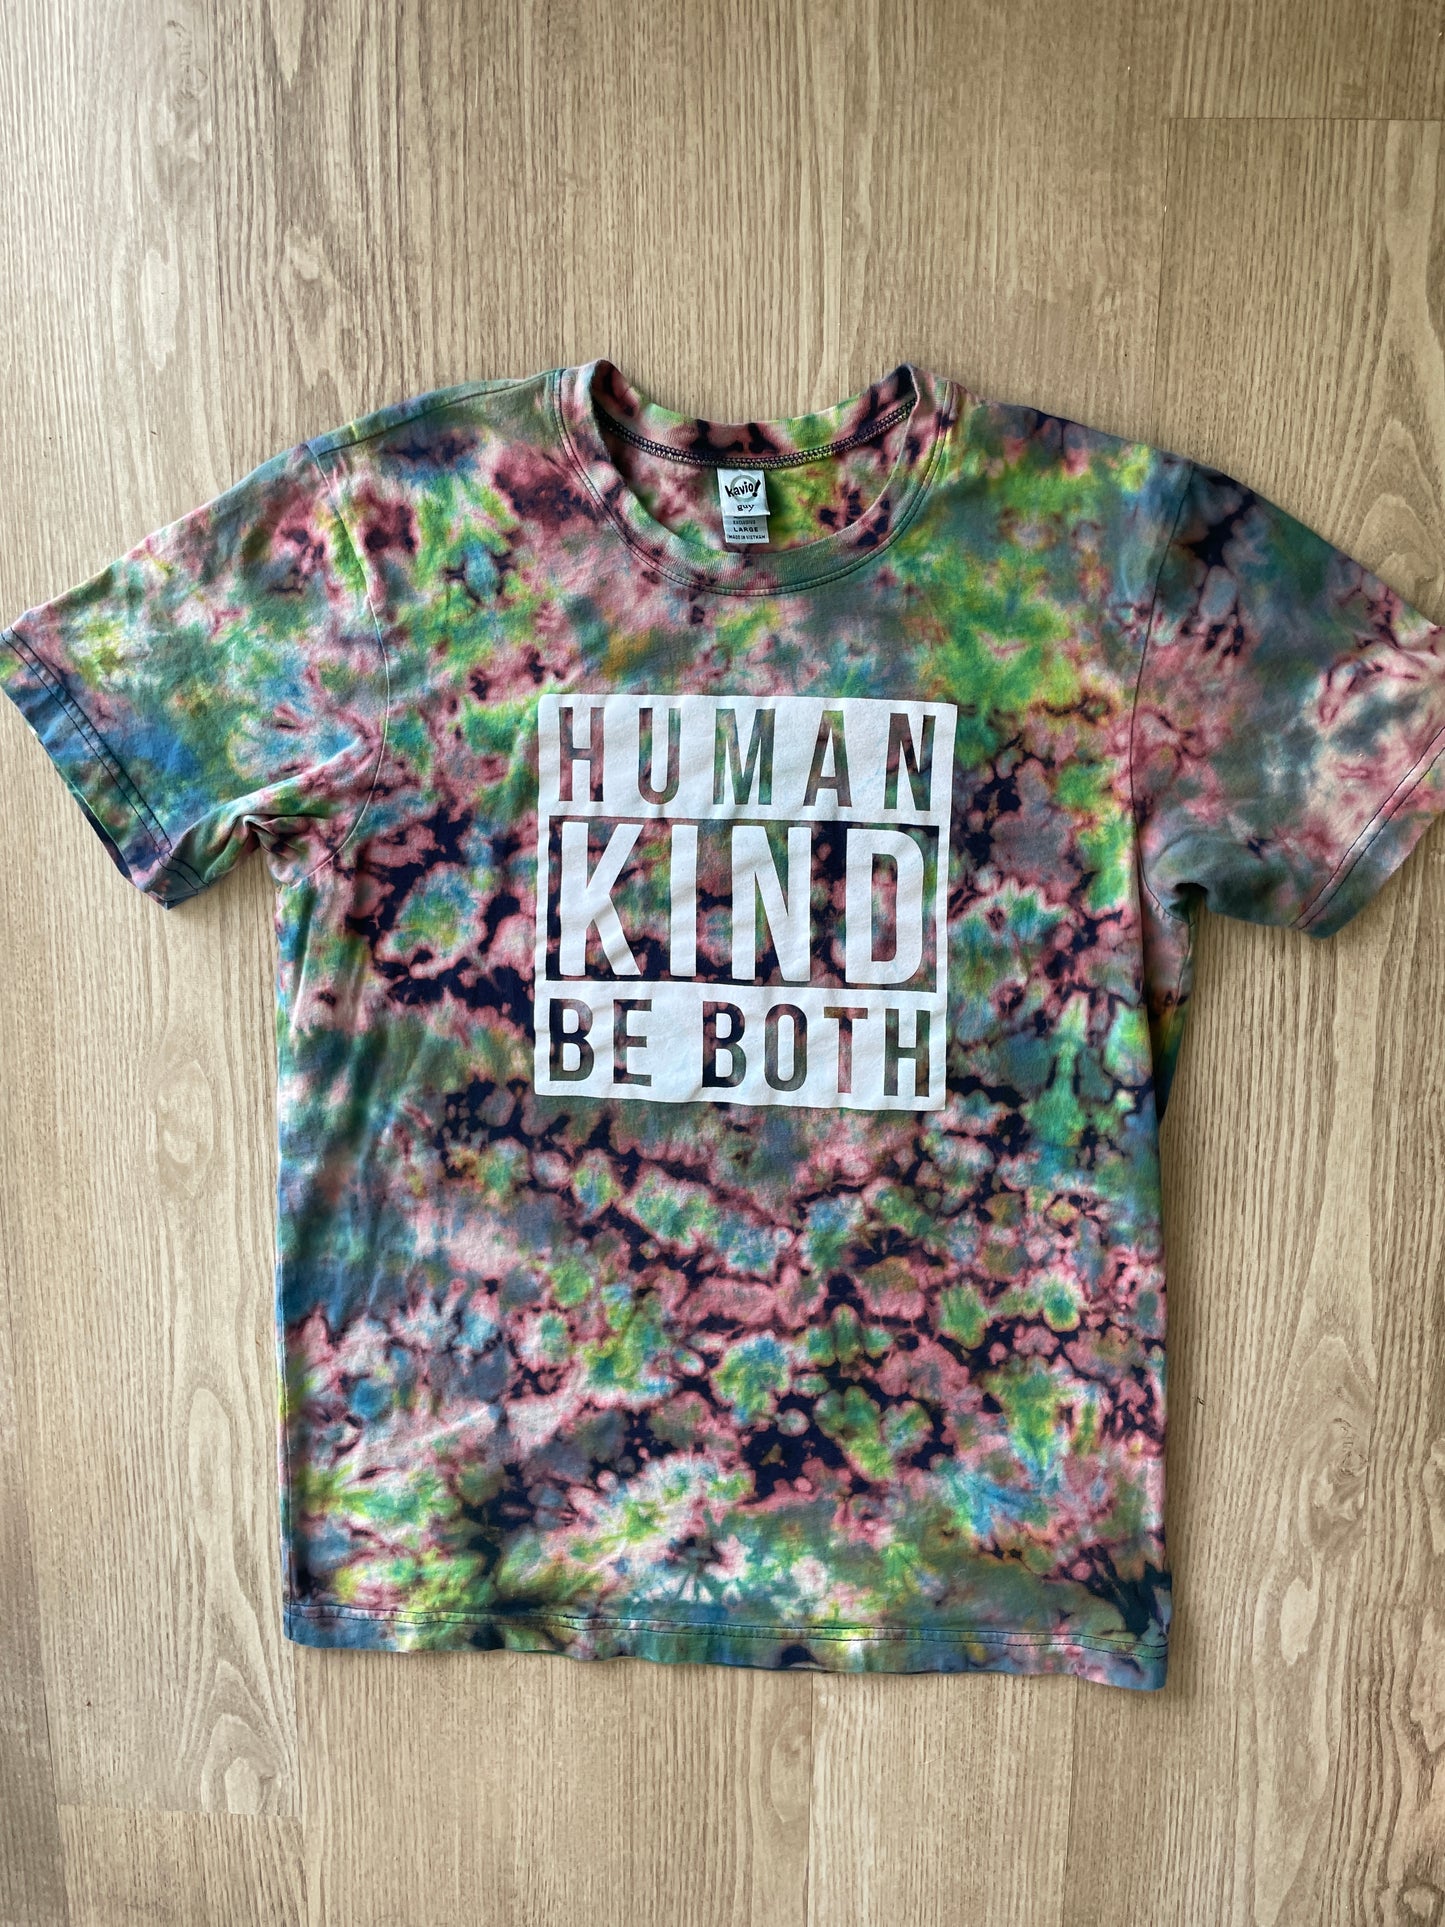 LARGE Men’s Human/Kind "Be Both" Handmade Reverse Tie Dye T-Shirt | One-Of-a-Kind Black, Blue, and Green Short Sleeve